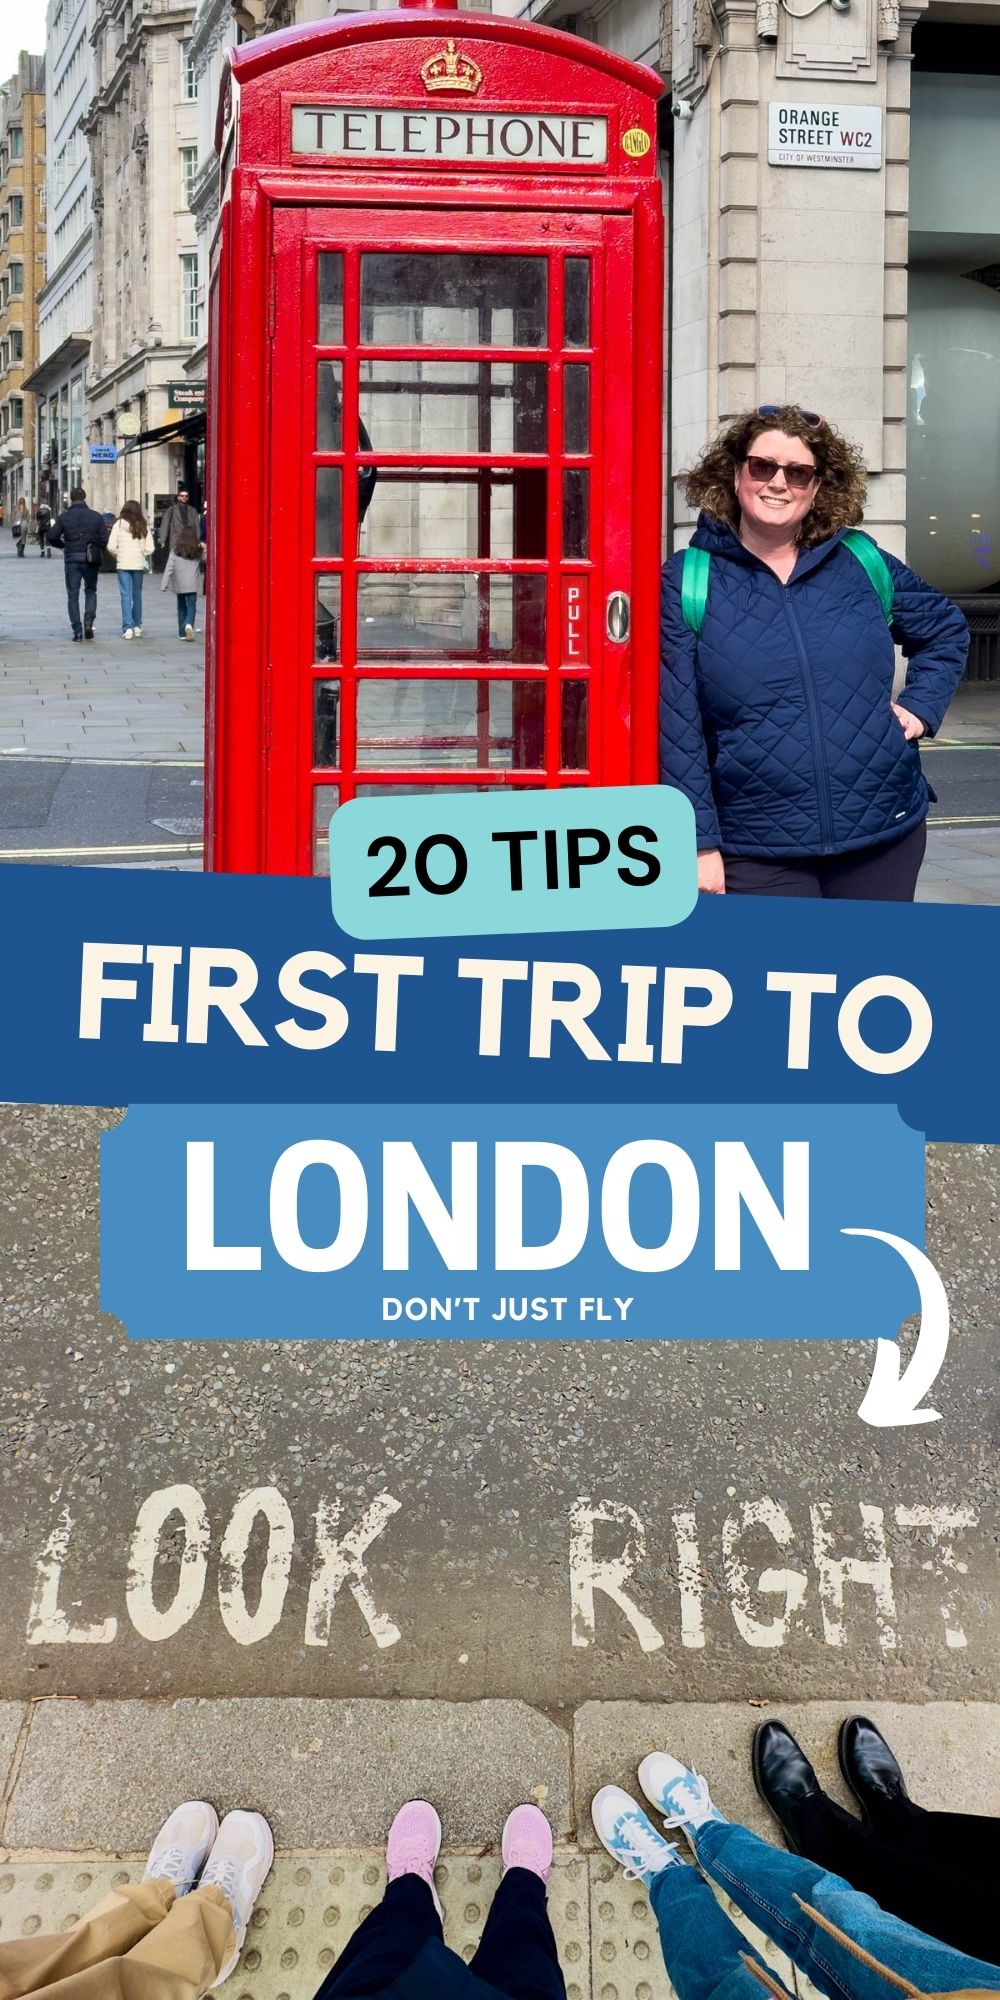 The photo collage shows the author in London standing next to a red phone booth next to a photo of her family lined up on the sidewalk next to a "Look Right" sign.